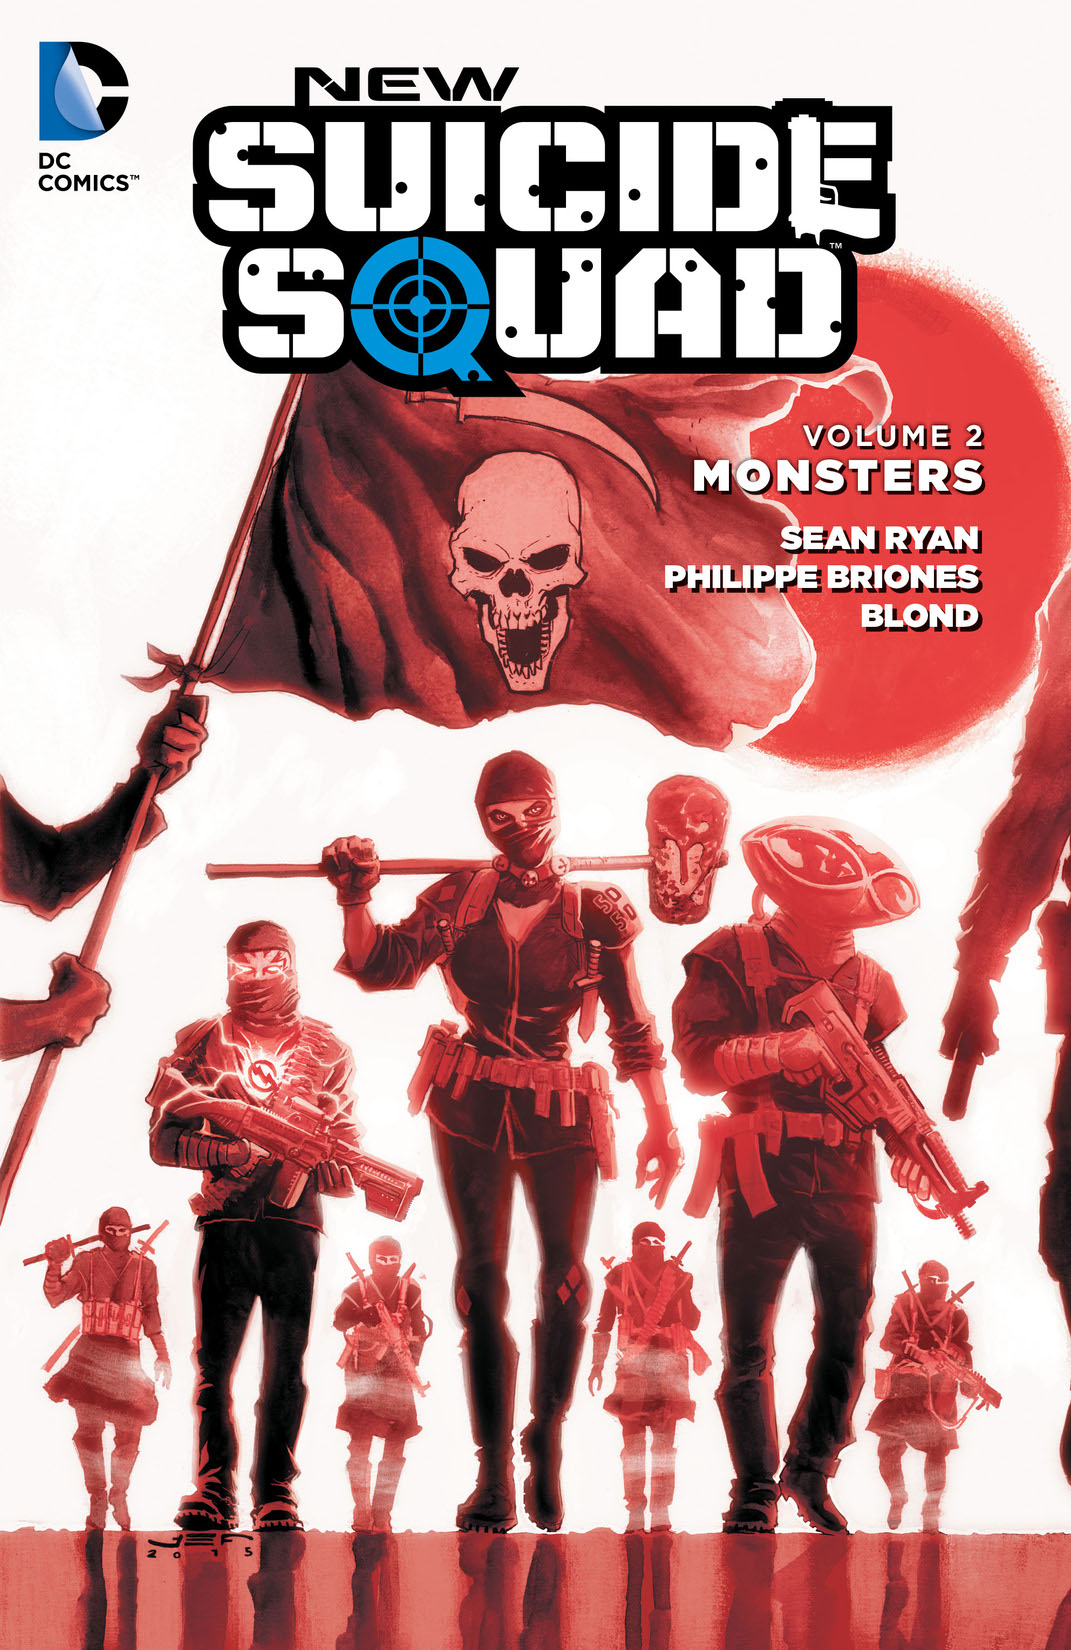 New Suicide Squad Vol. 2: Monsters preview images